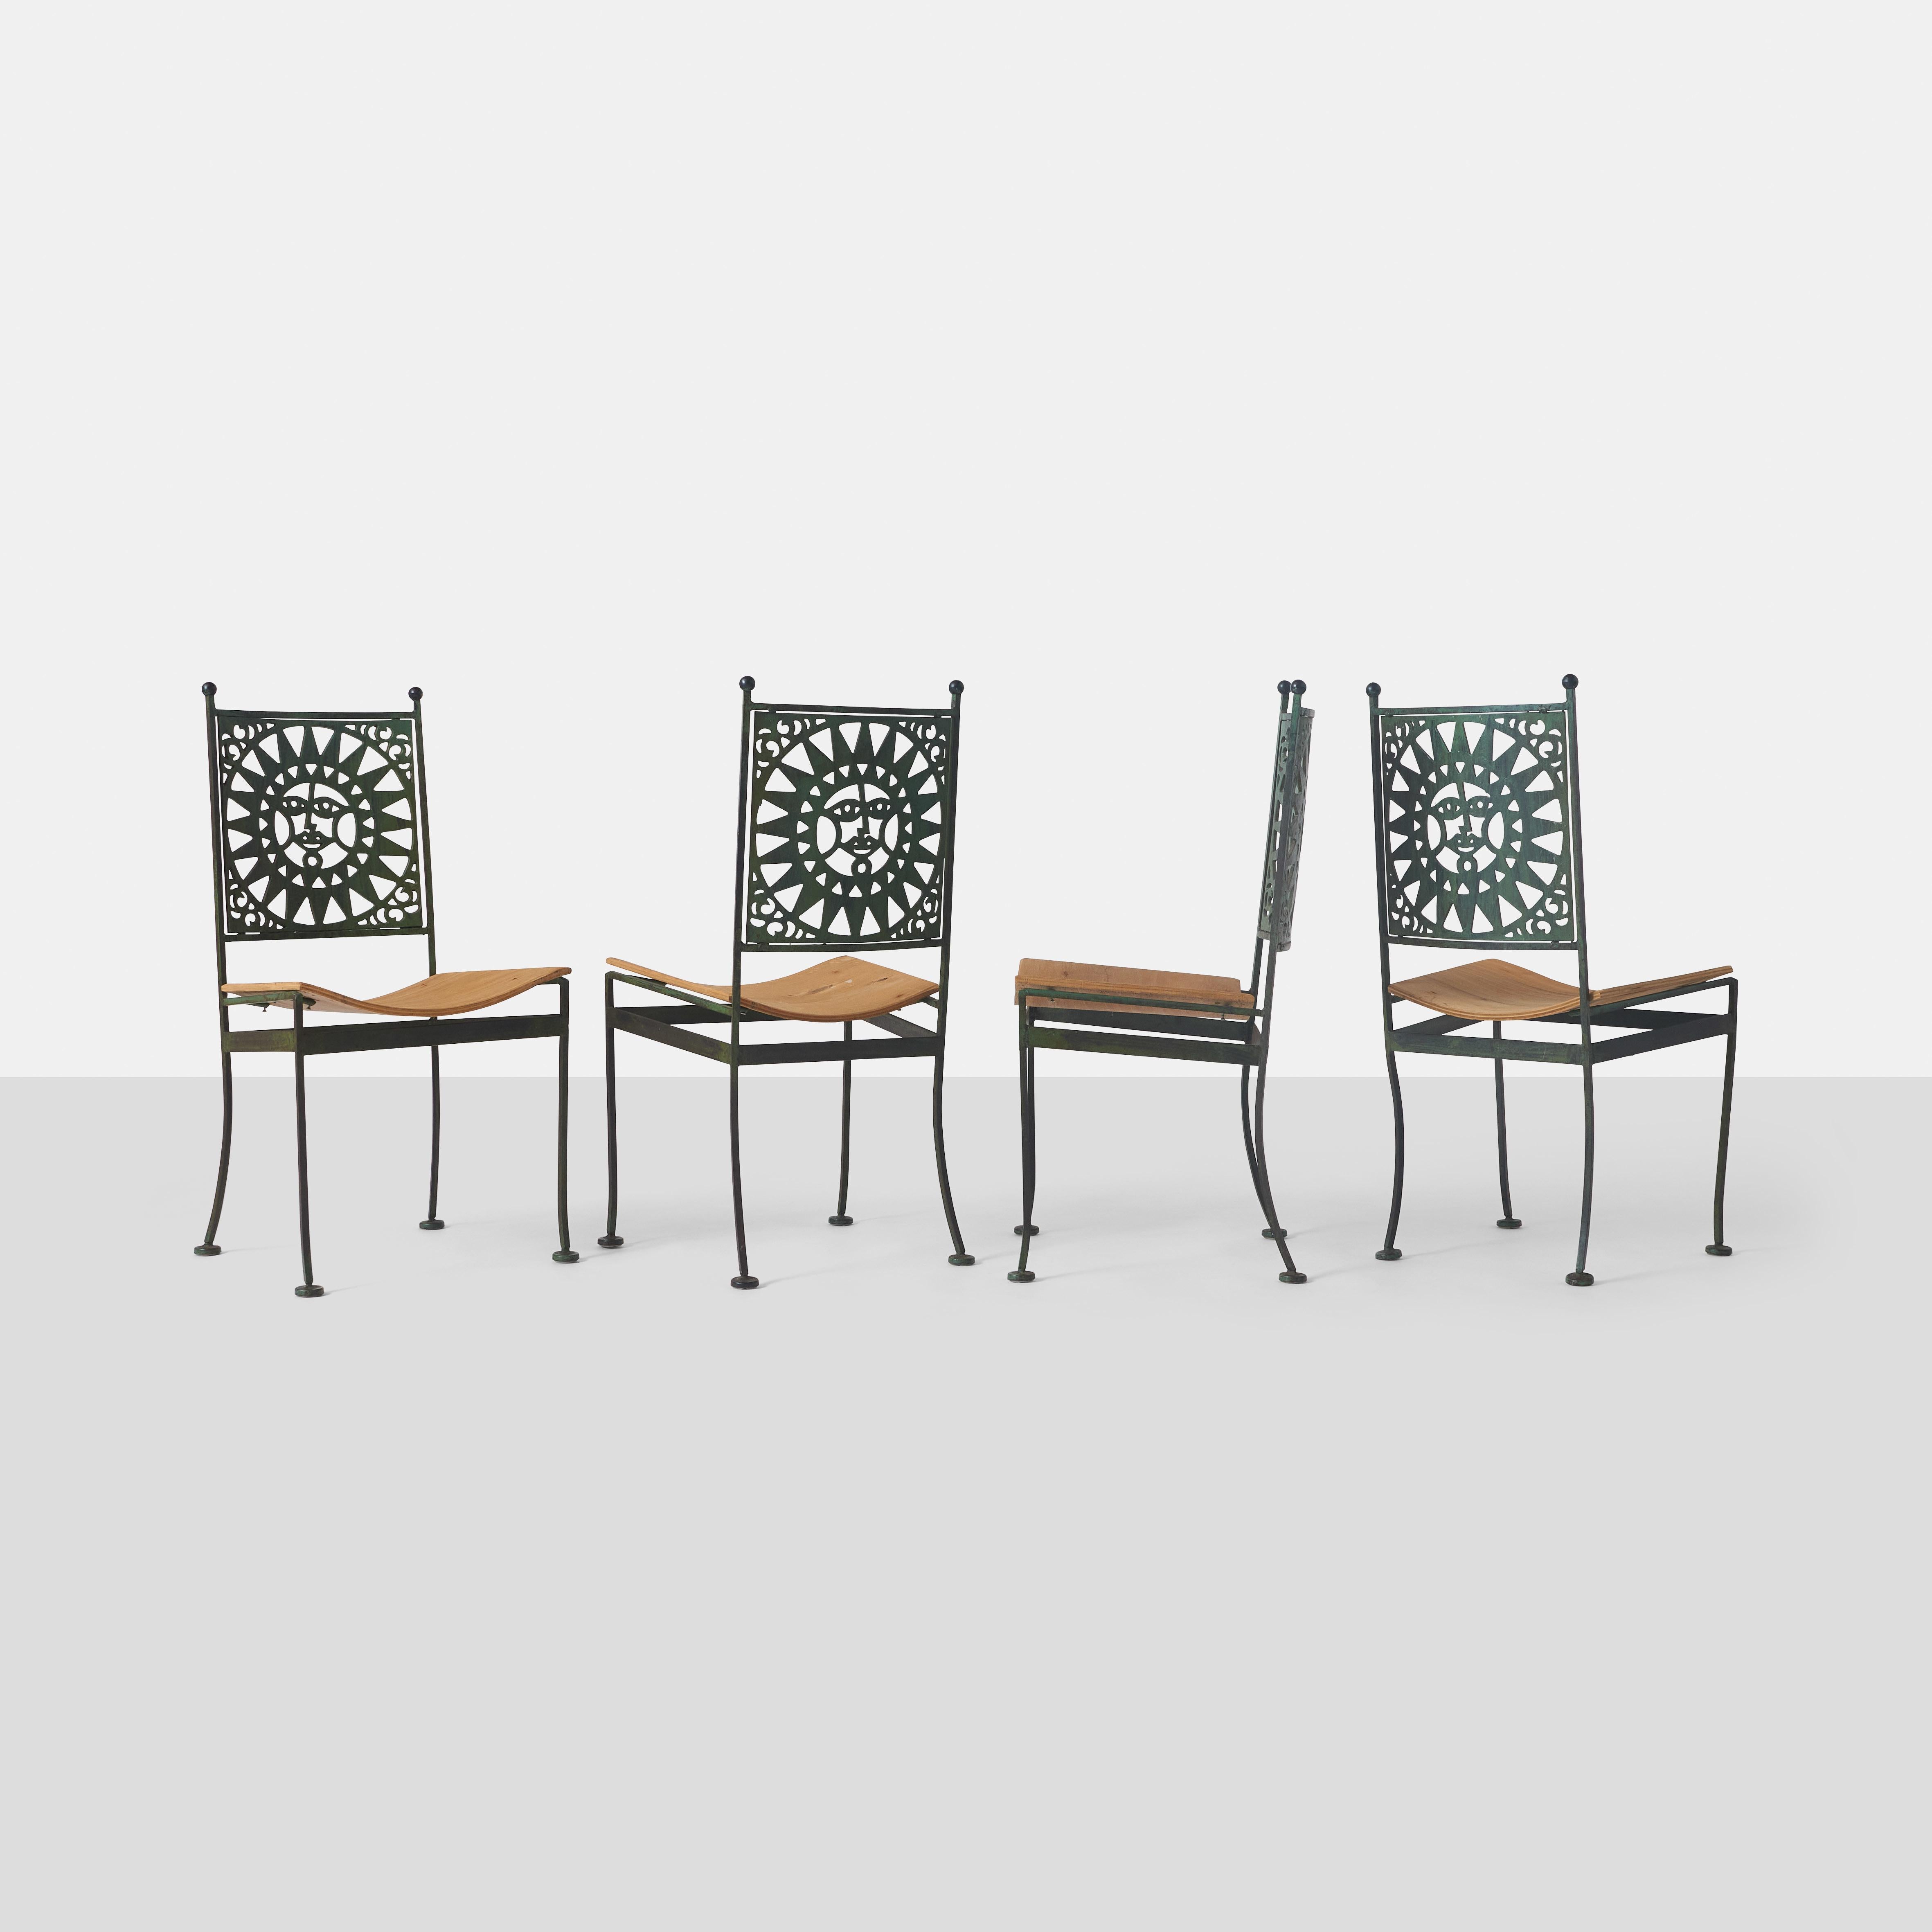 This set of four armless dining chairs were designed by Arthur Umanoff, a prominent American furniture designer known for his innovative use of mixed materials such as metal, wood, and rattan. The chairs are part of Umanoff's Mayan collection and